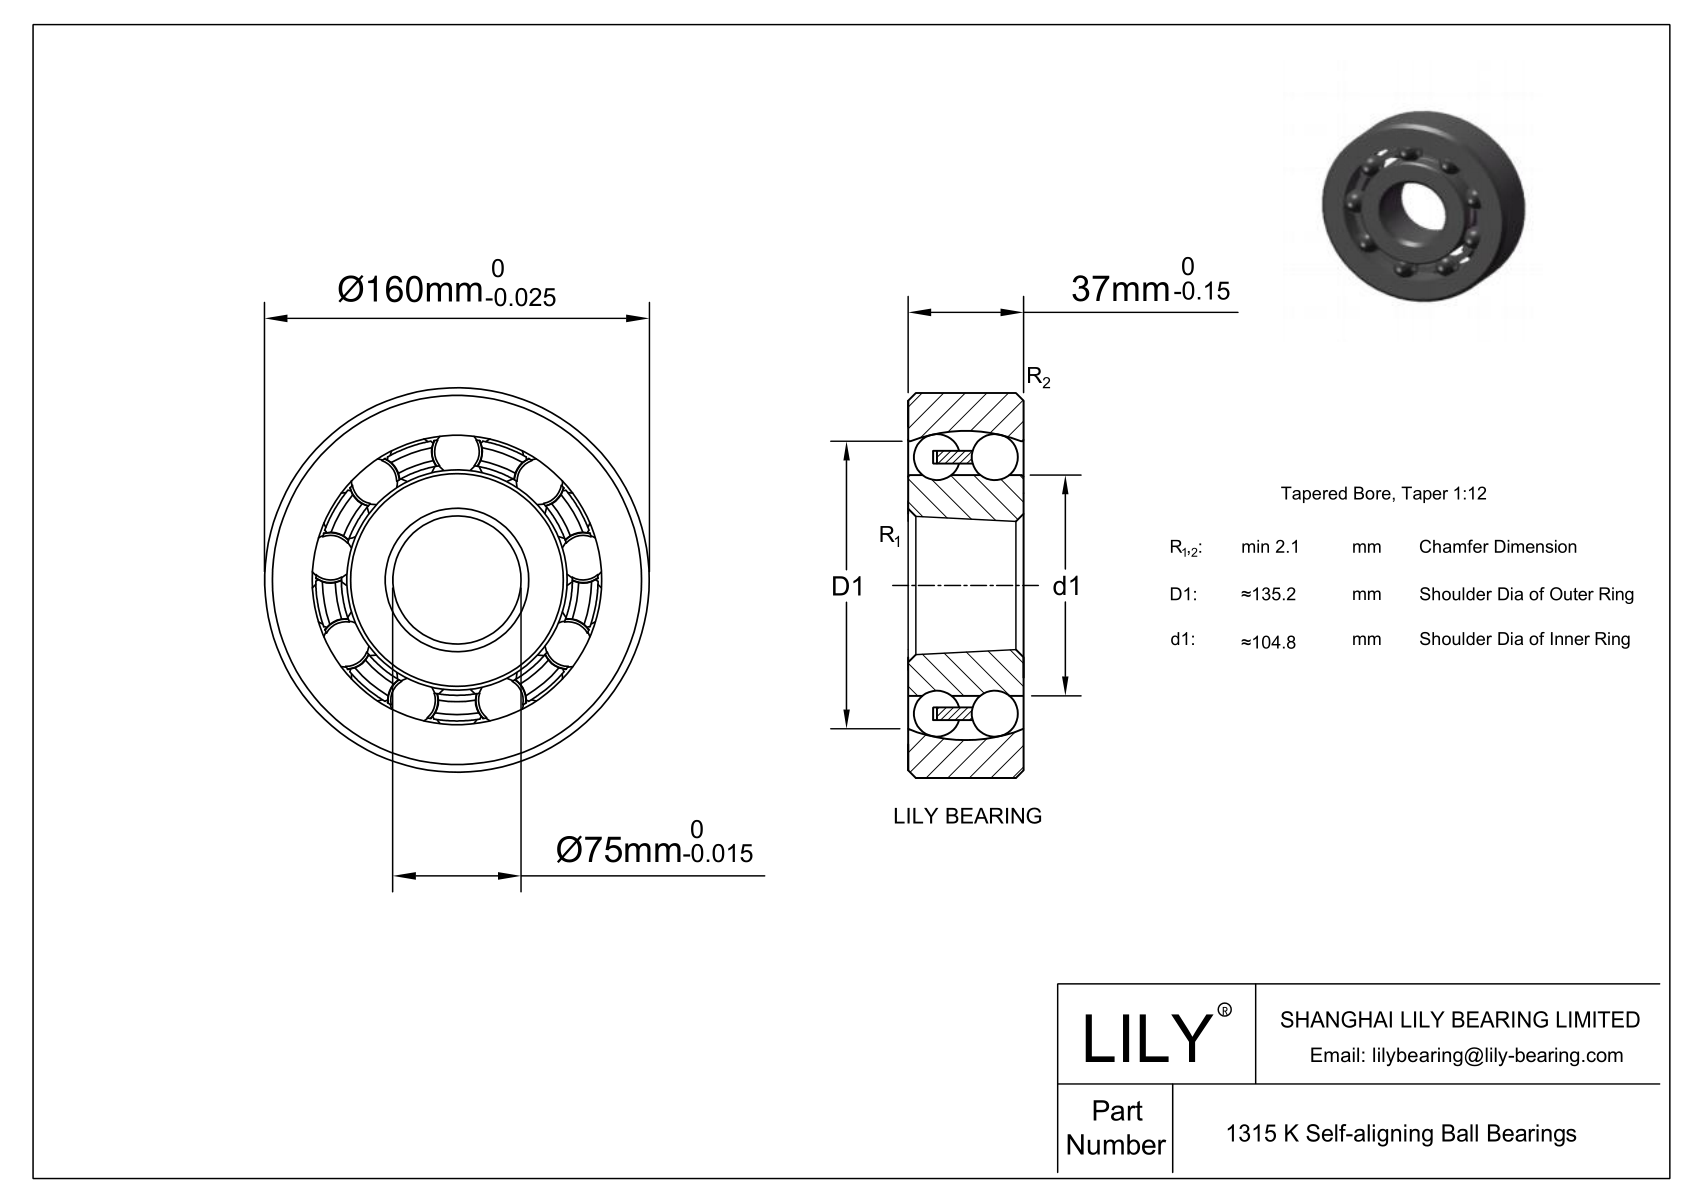 S1315 K Stainless Steel Self Aligning Ball Bearings cad drawing